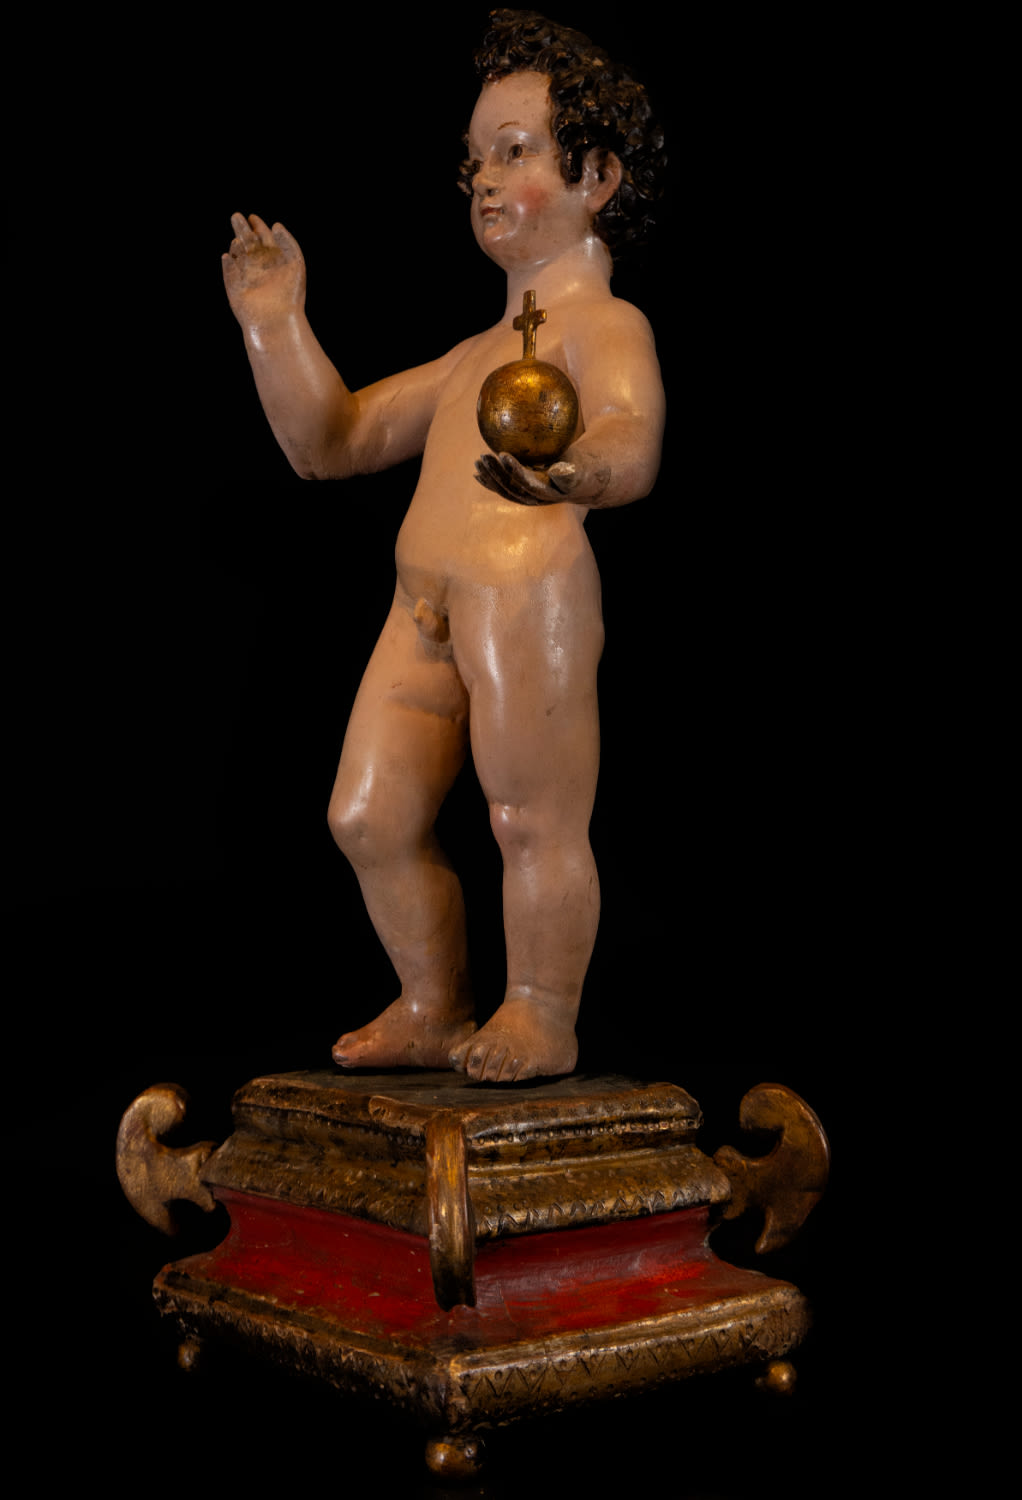 Sculpture of the Child of the Ball, Spanish school, 17th century - Image 3 of 4